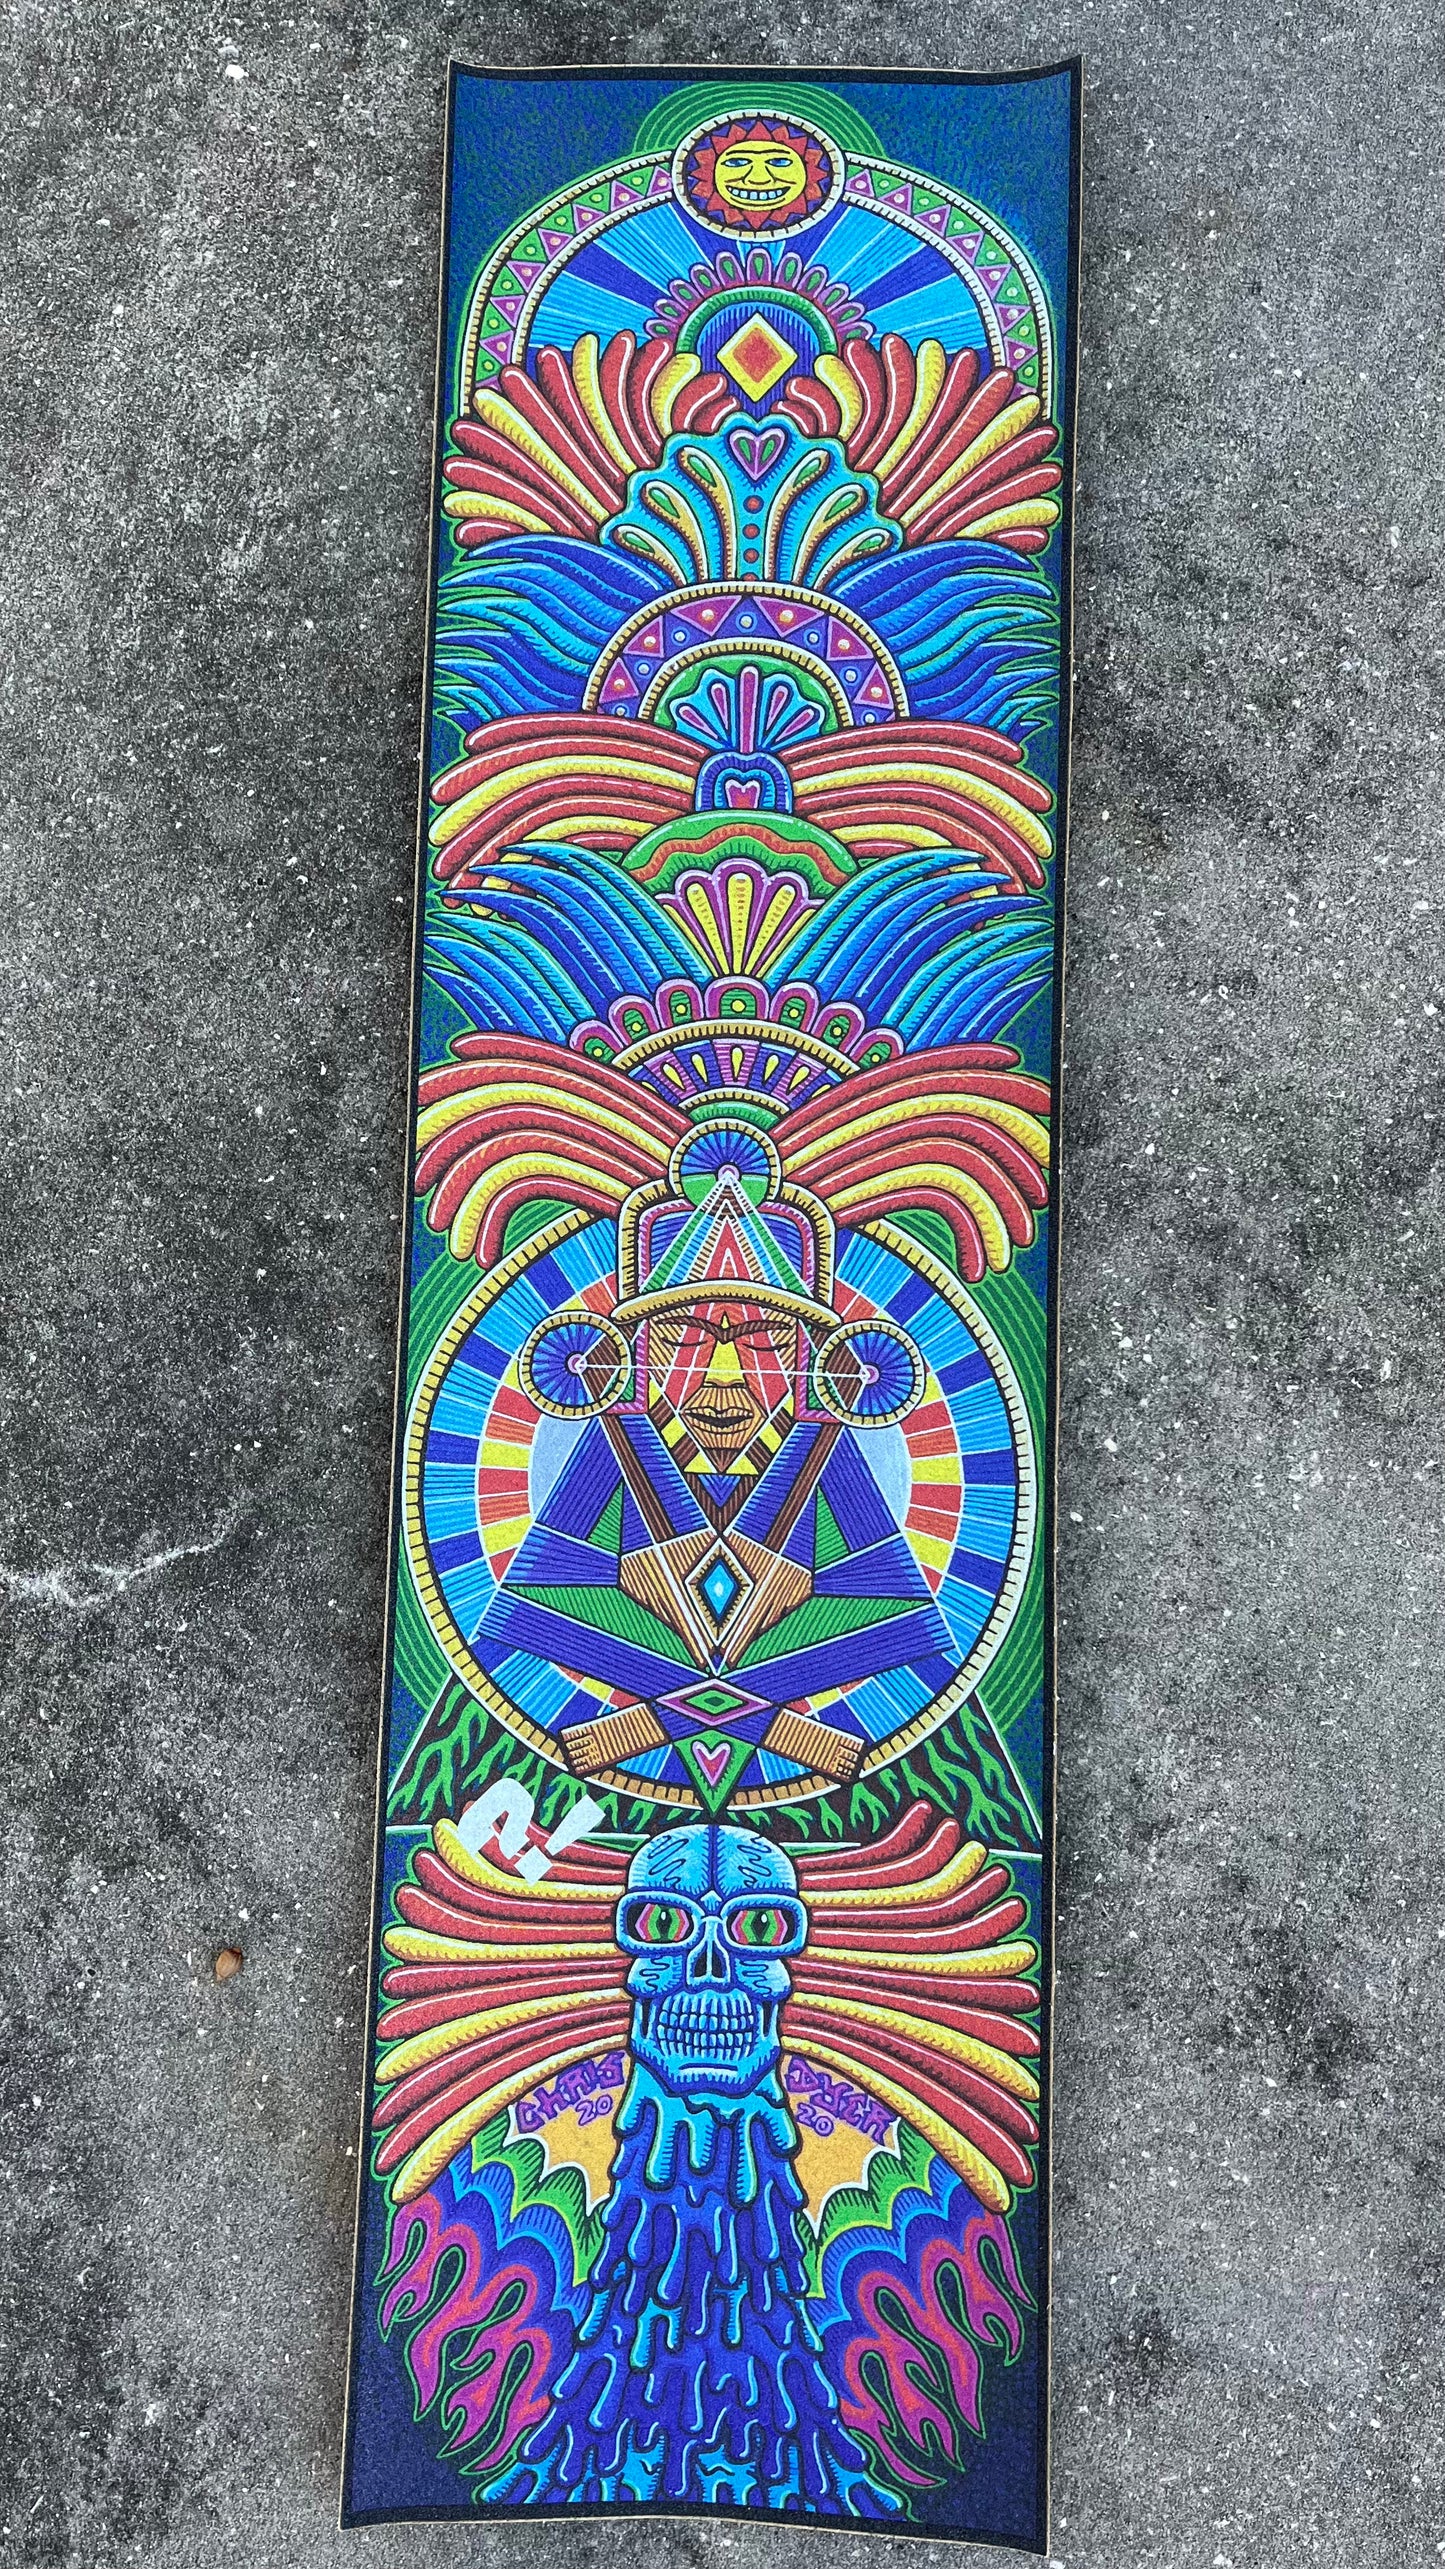 "The Cocooning" Griptape